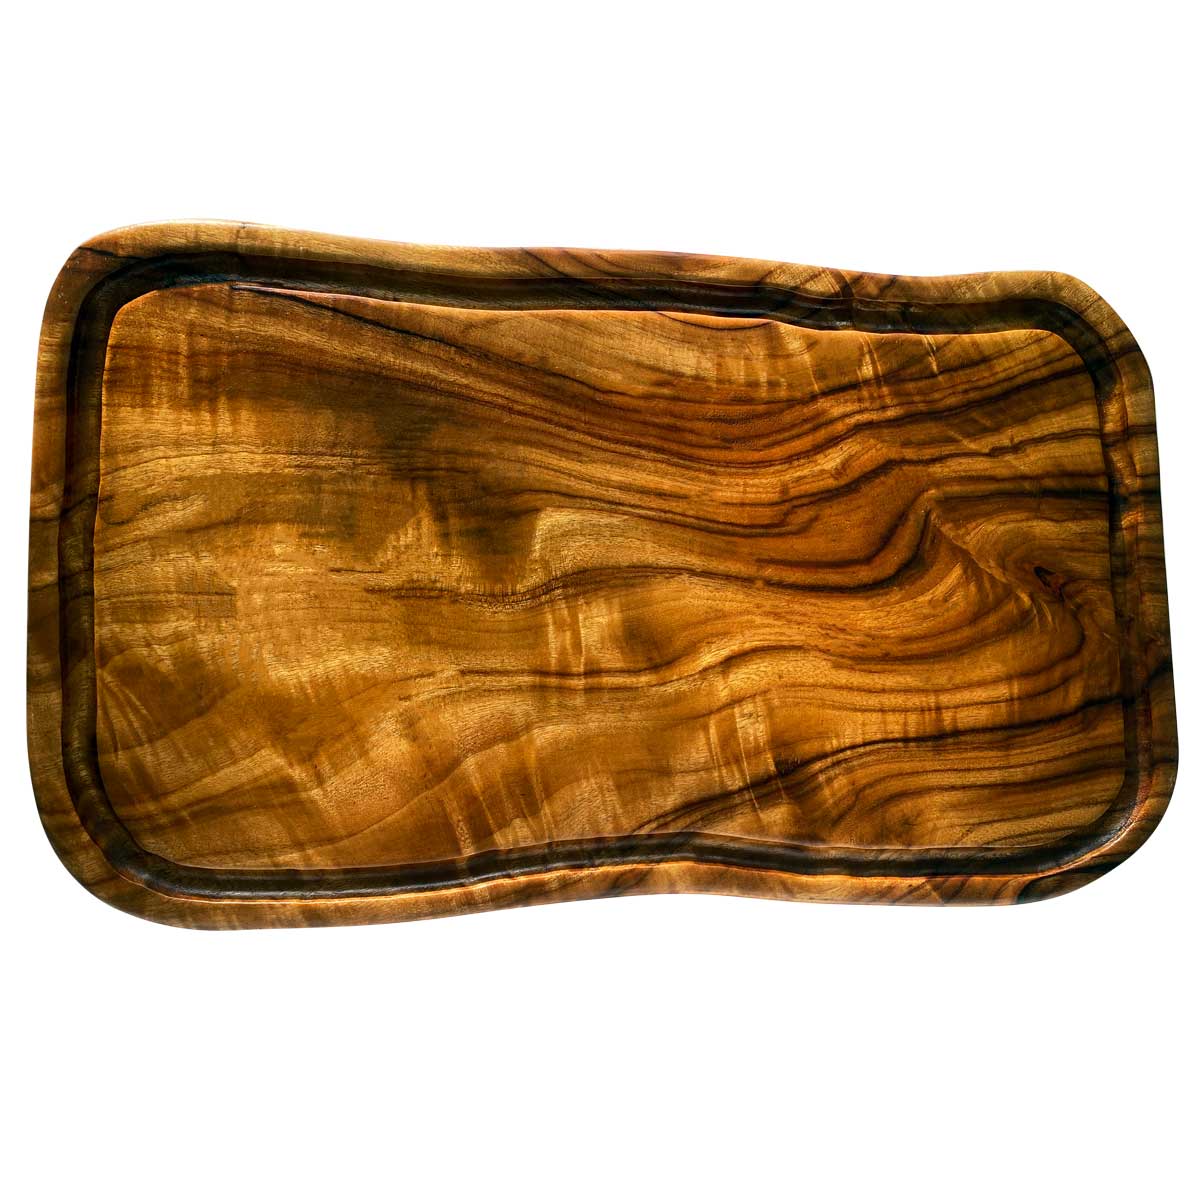 An extra large carving board with a deep groove or juice rail to catch spills, made with camphor laurel timber that has gorgeous colours and grains.